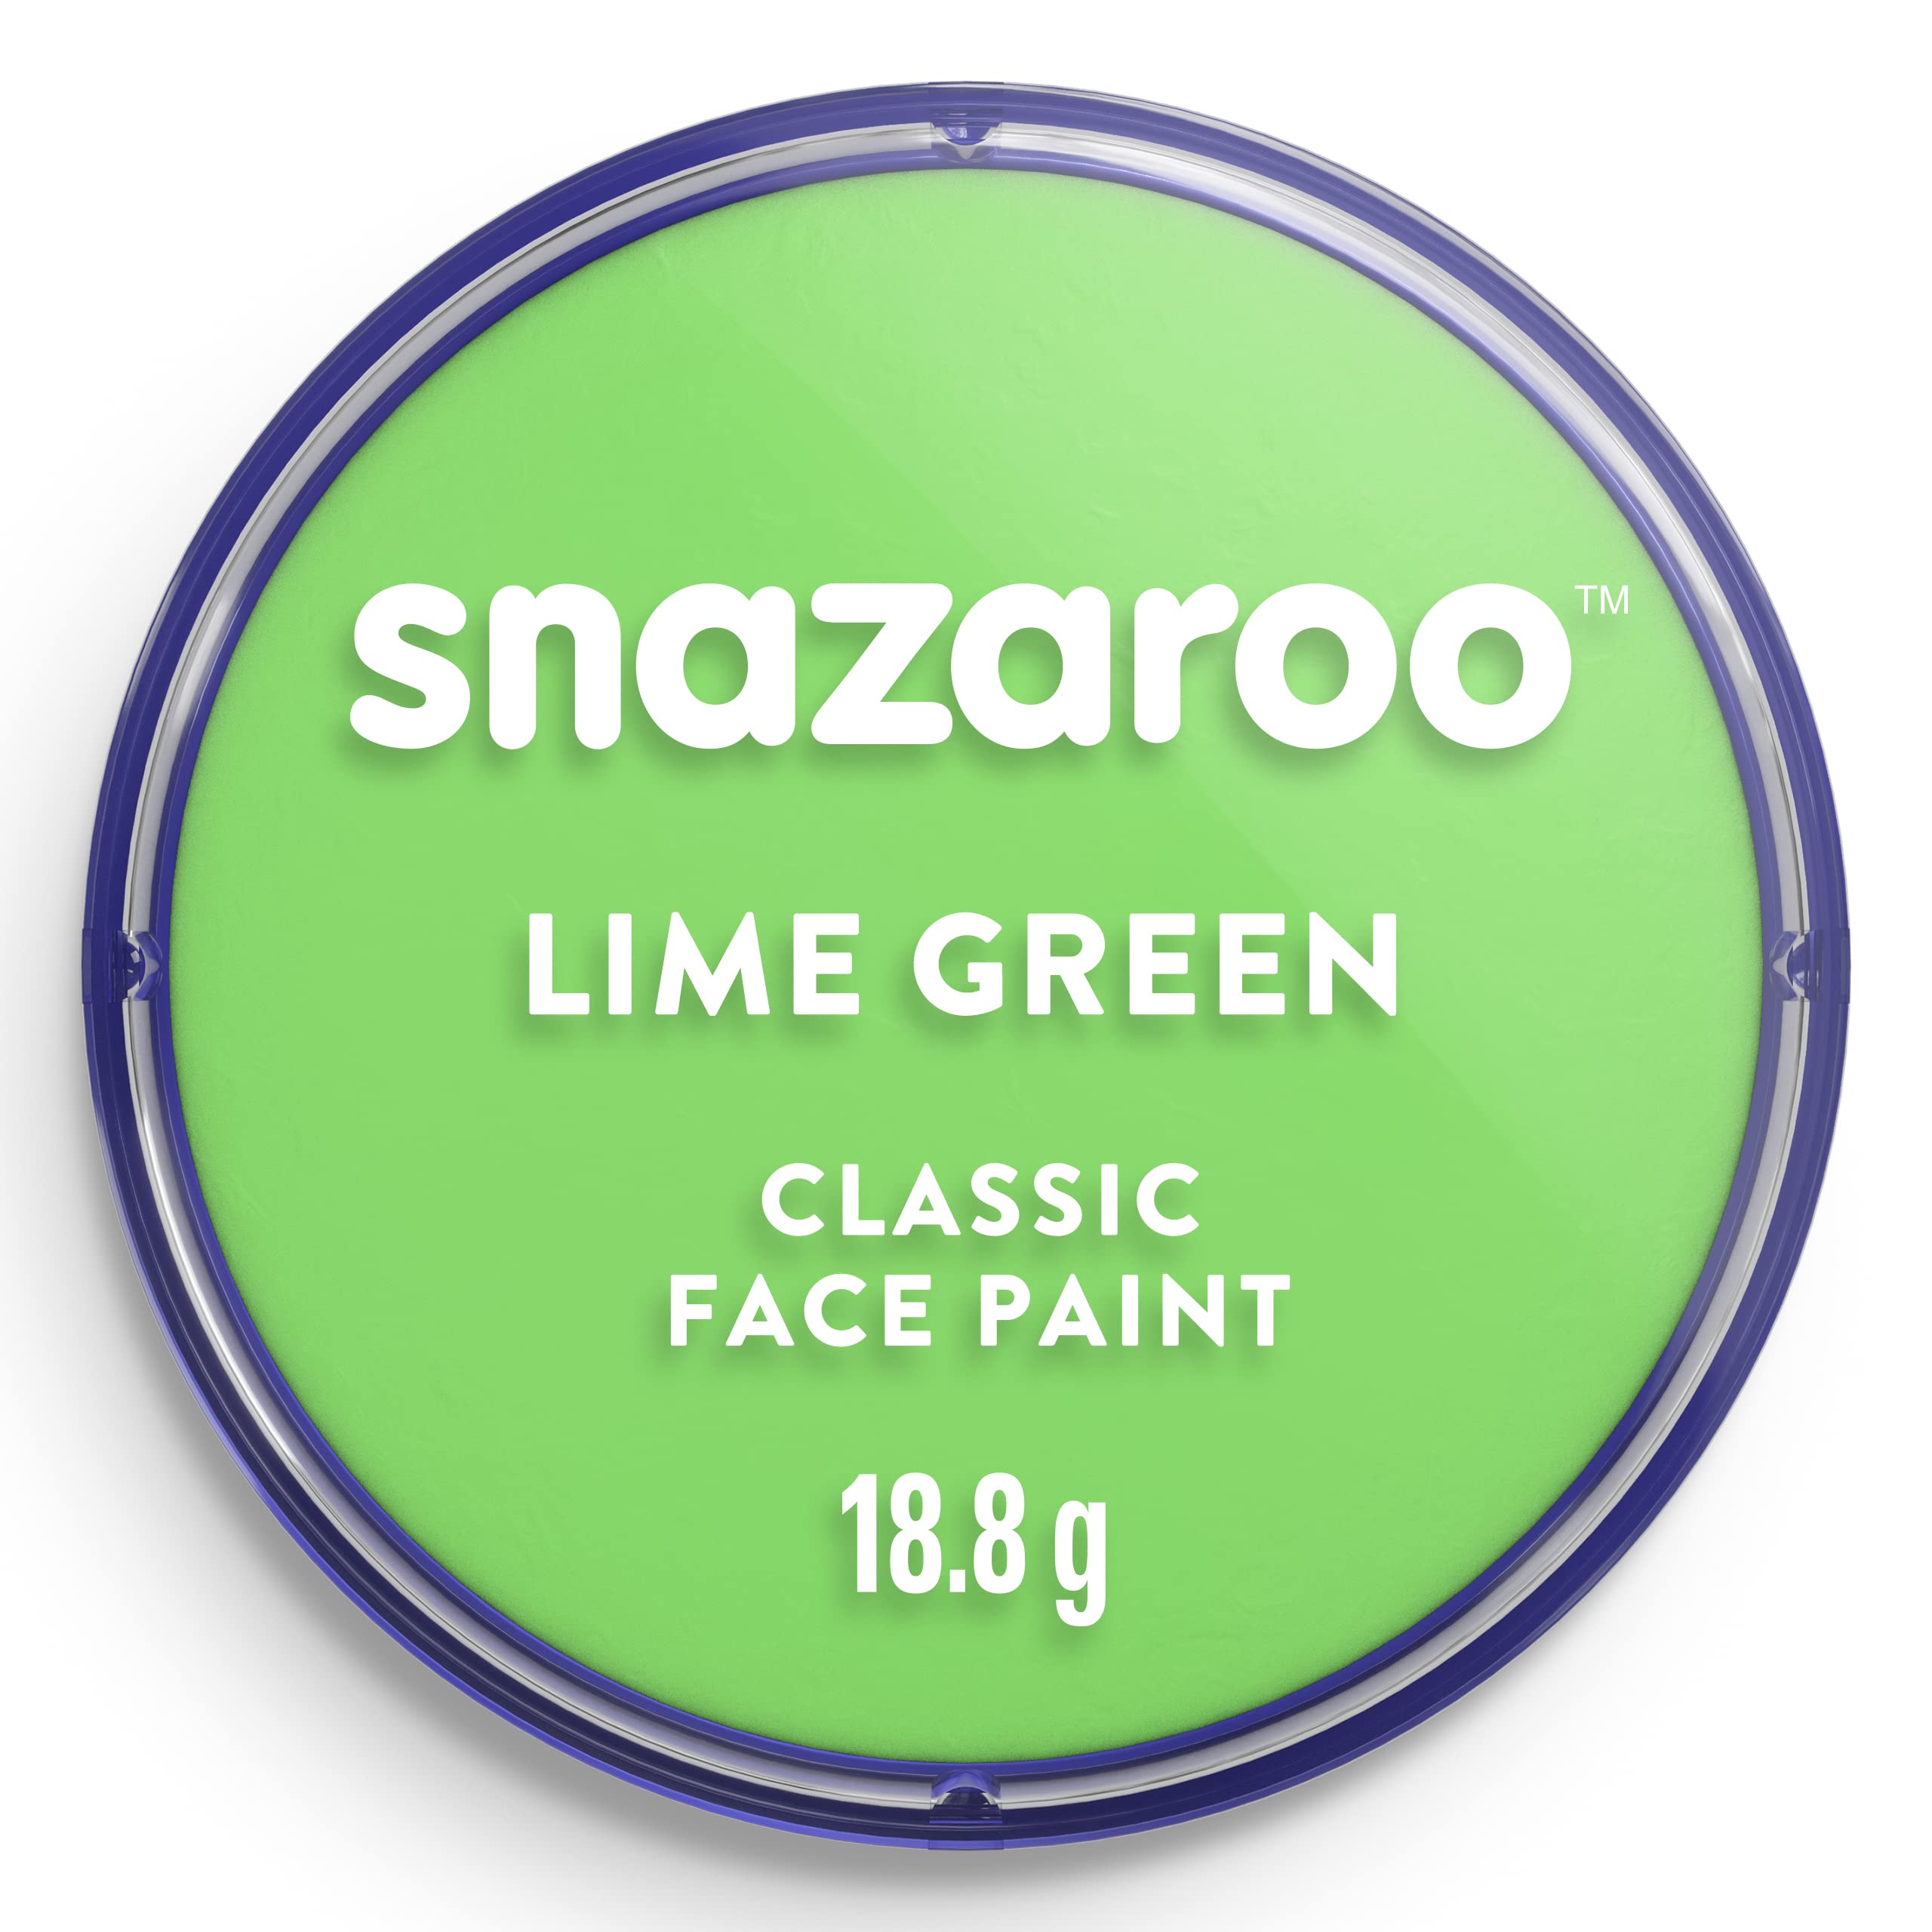 Snazaroo Classic Face and Body Paint, 18.8g (0.66-oz) Pot, Lime Green